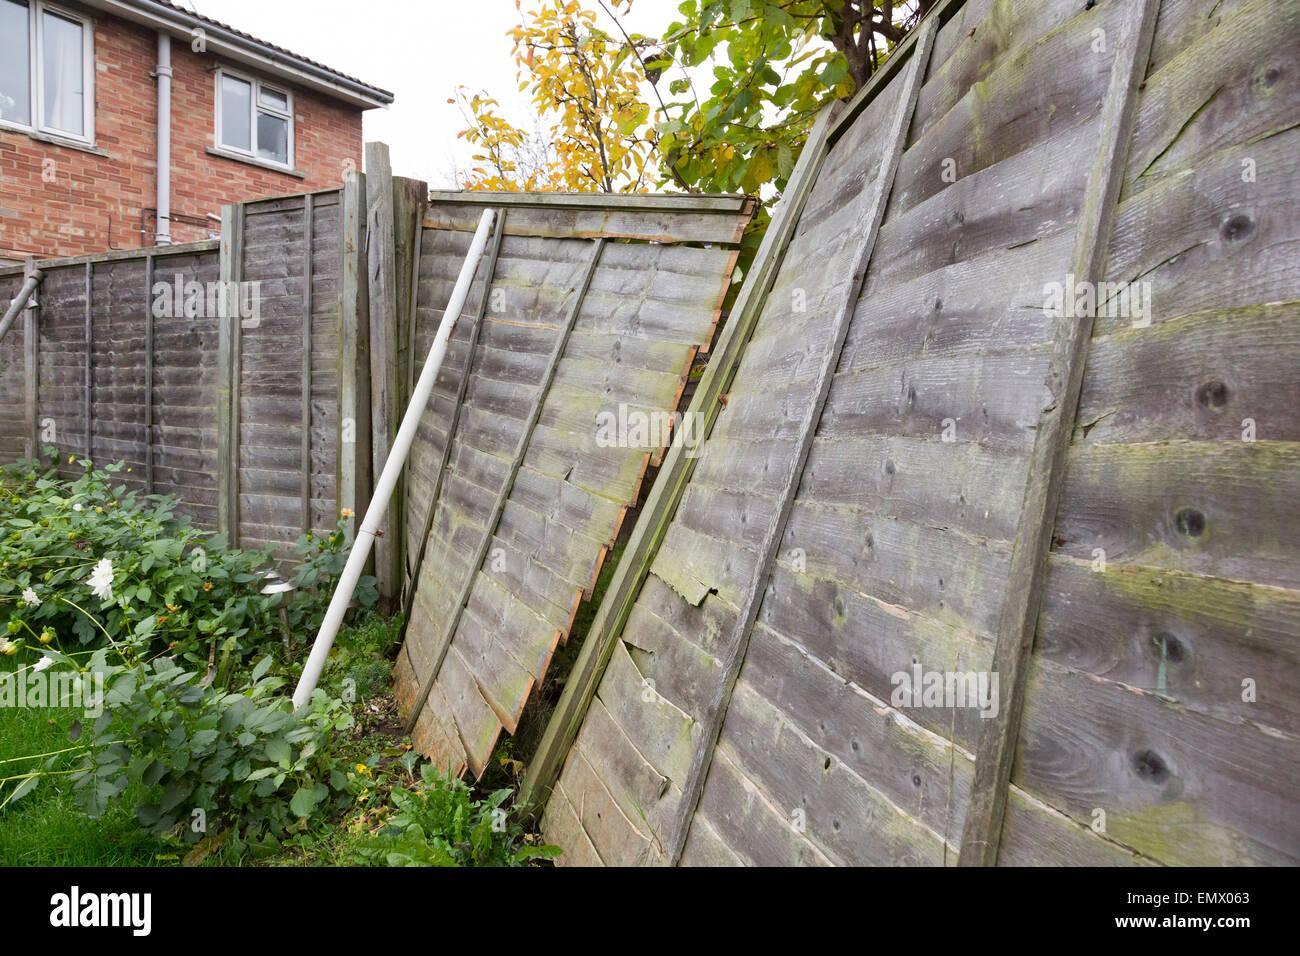 wooden panel fence blown over in a storm Stock Photo